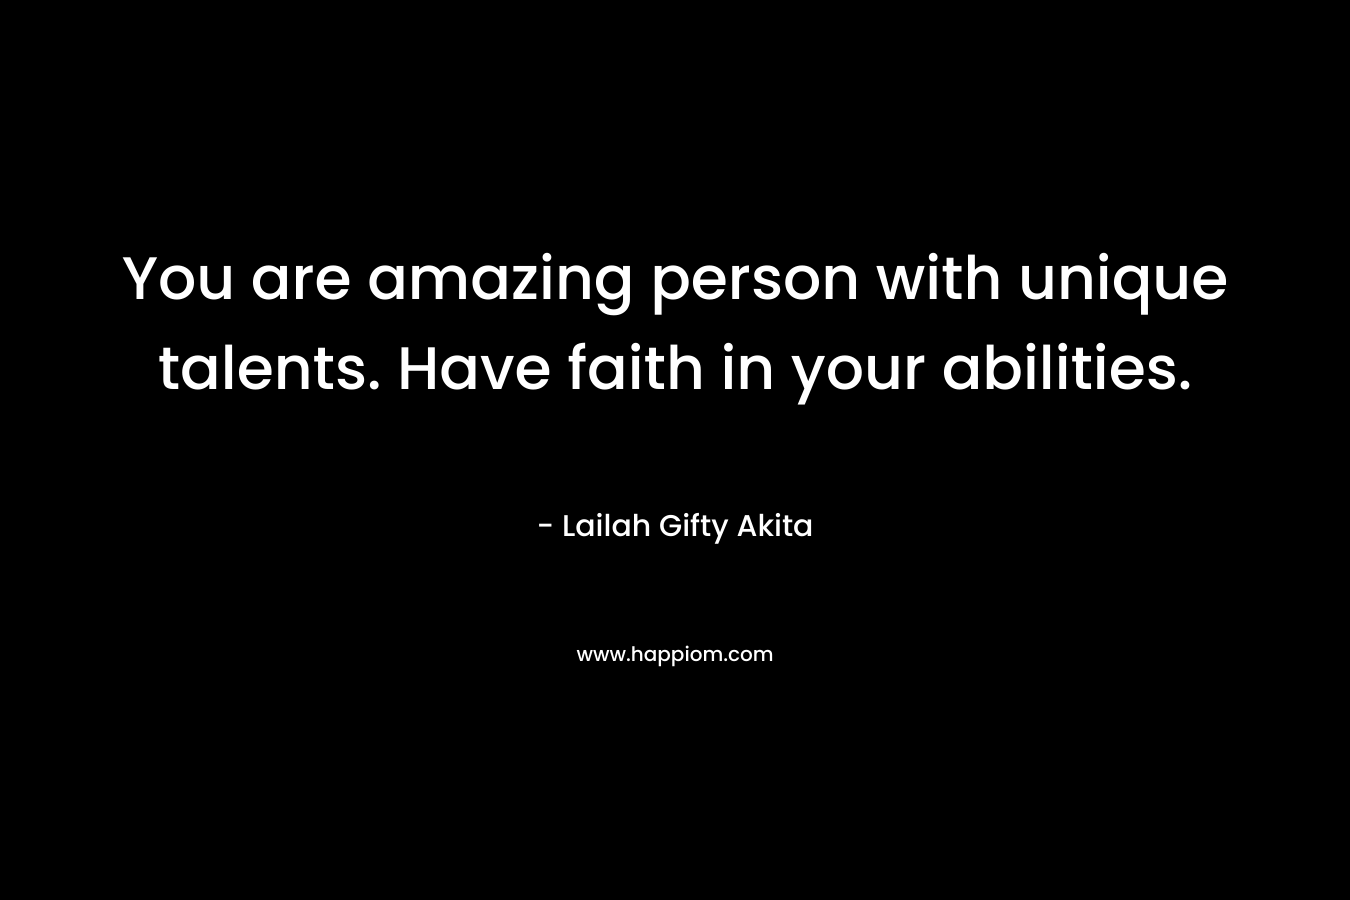 You are amazing person with unique talents. Have faith in your abilities. – Lailah Gifty Akita